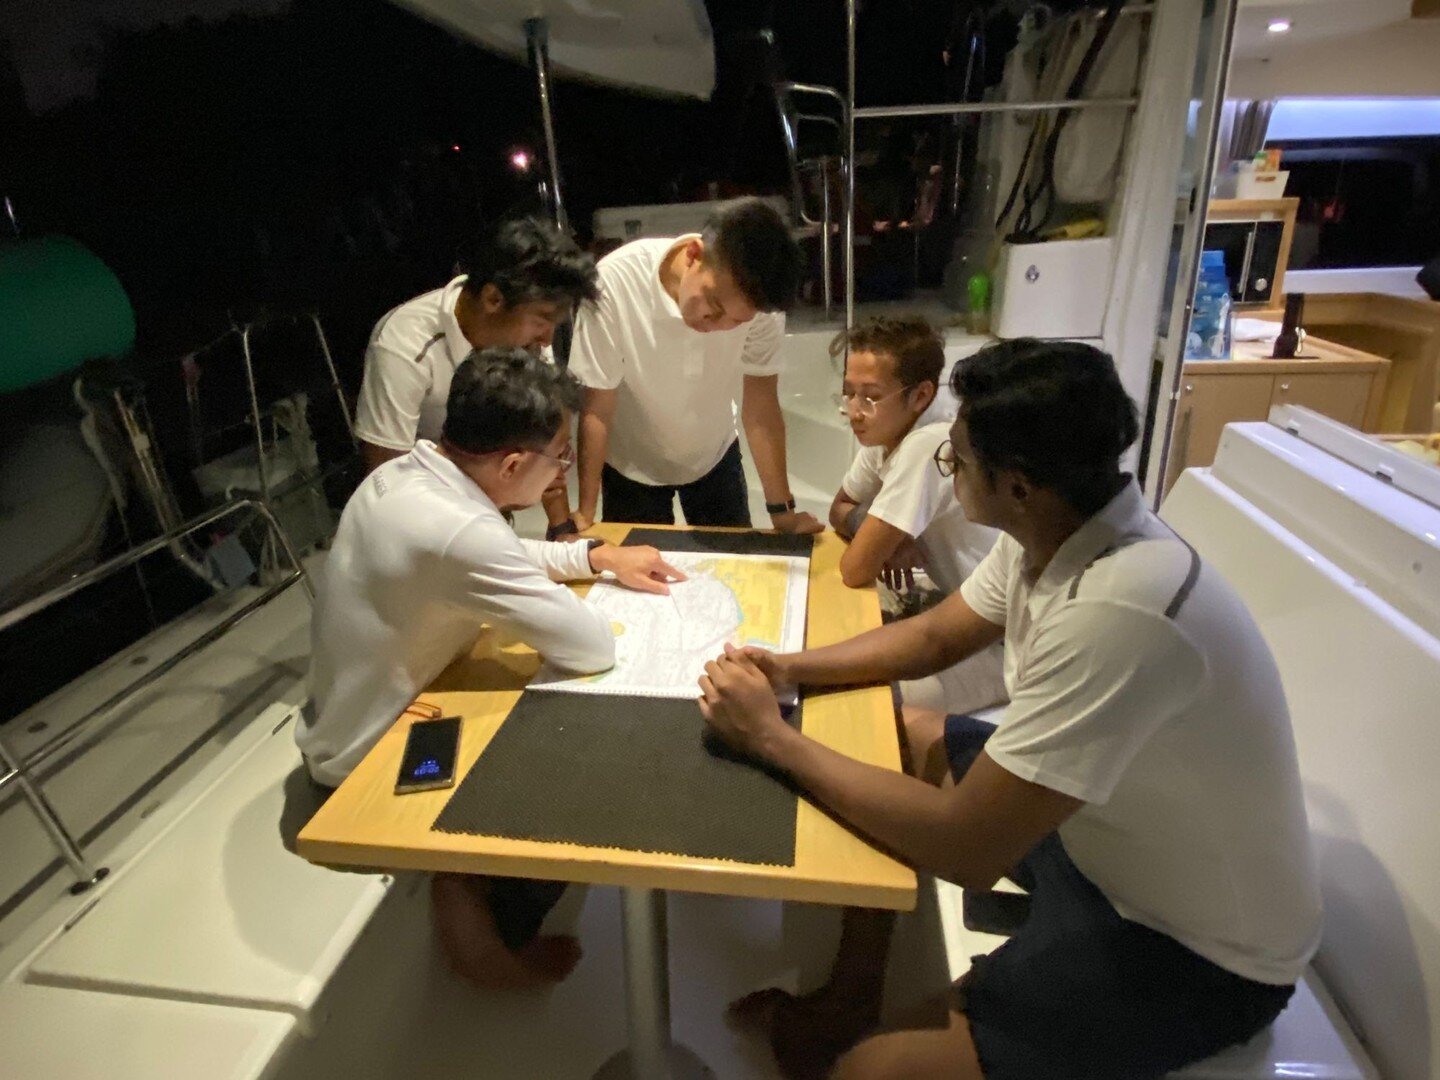 Have you ever been interested in sailing&hellip; and how you can do that safely in the dark? We are running our second CCC Program in October this year! Stay tuned and keep a look out for more details in our website. Meanwhile, you can check out our 